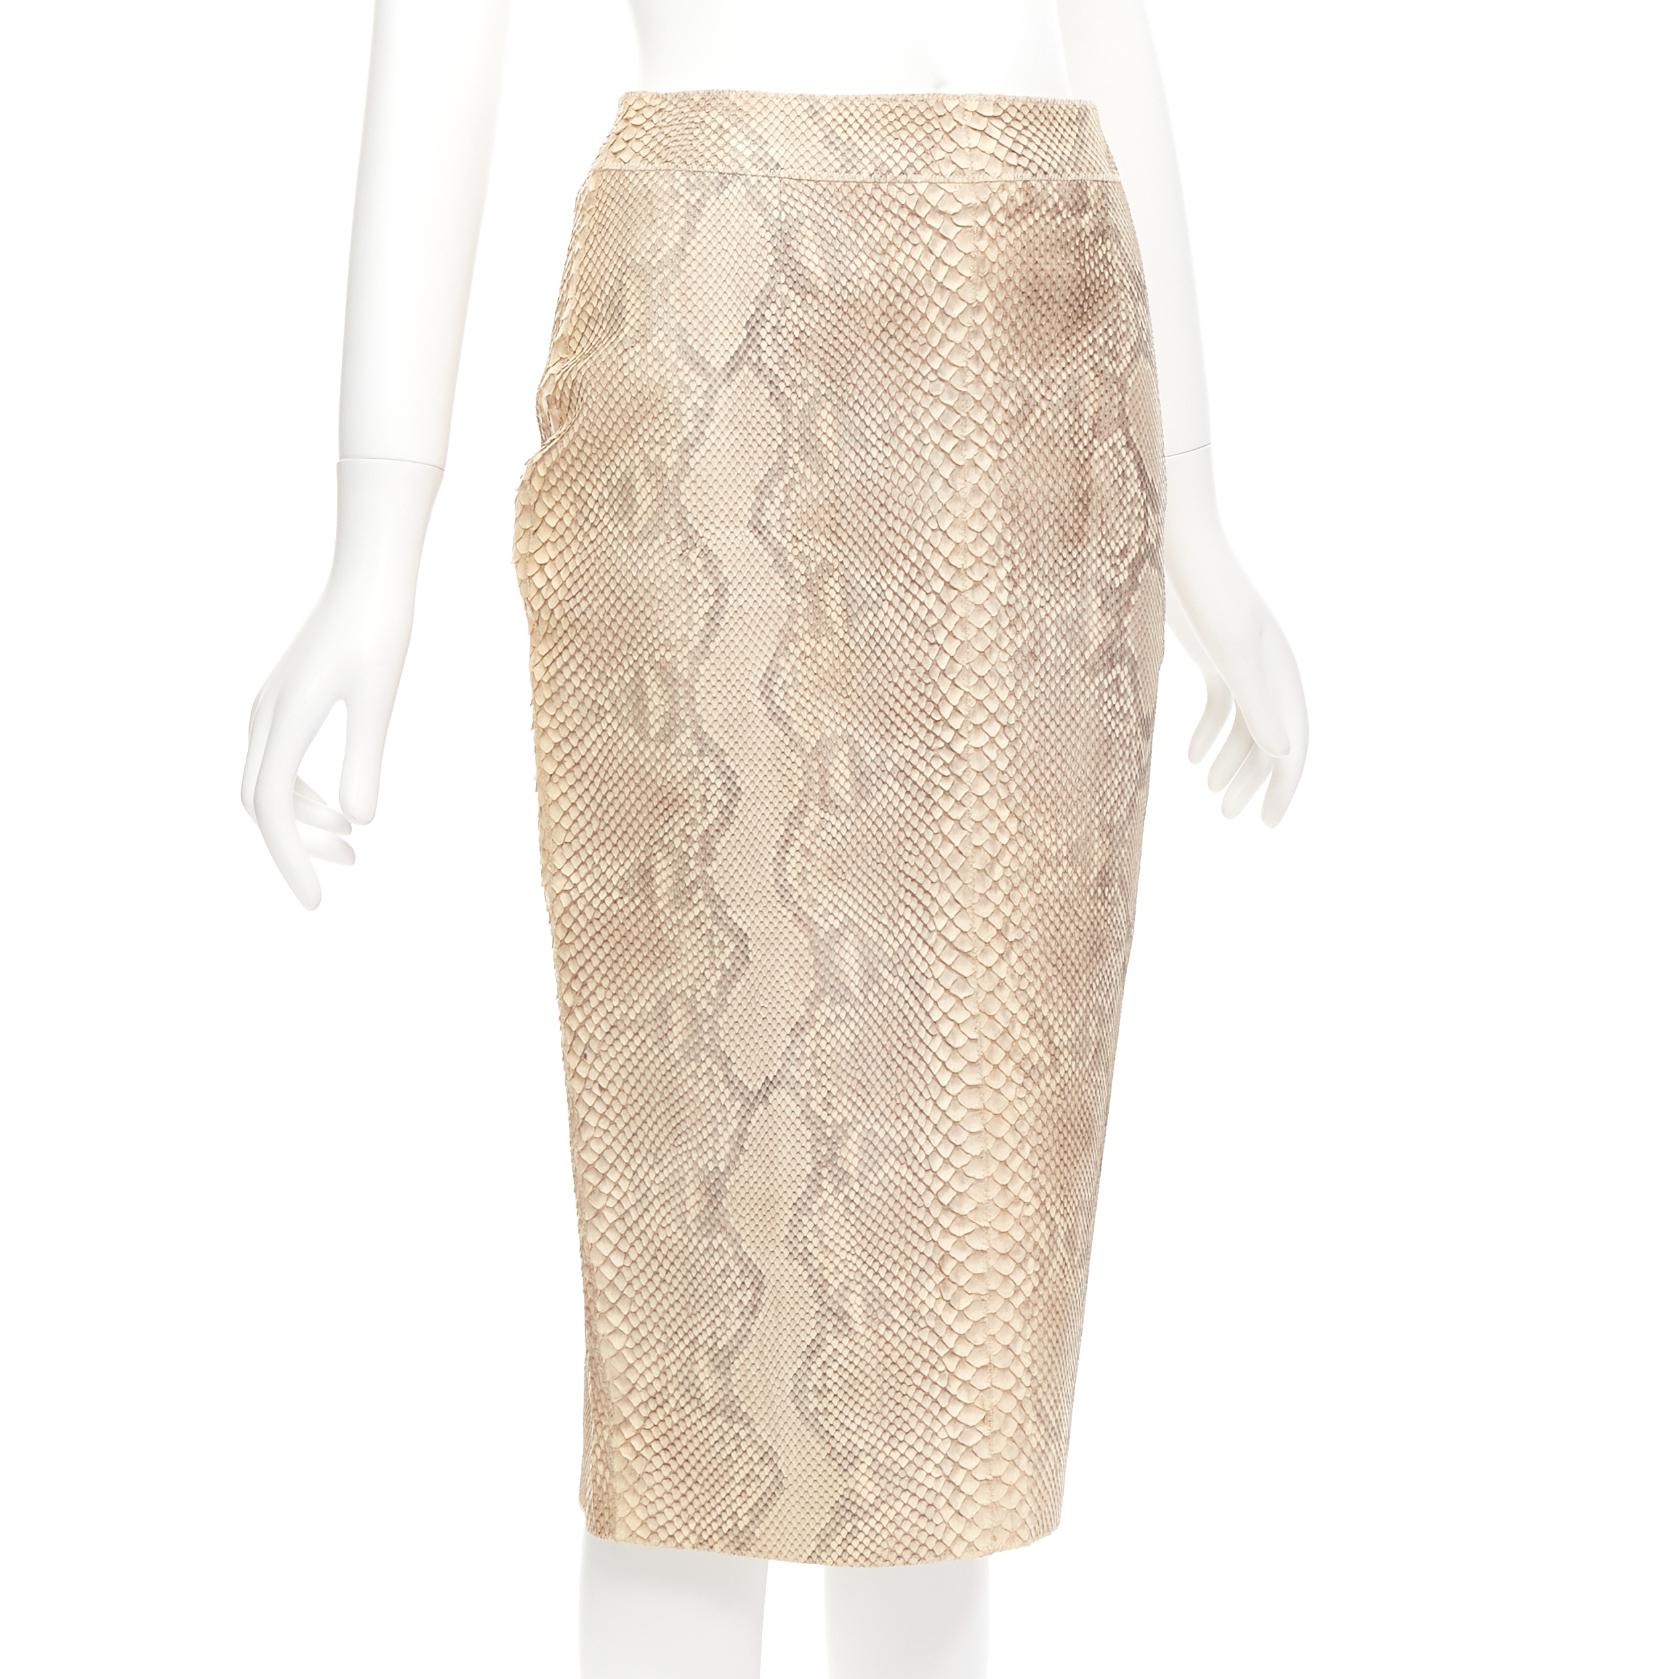 YVES SAINT LAURENT Rive Gauche Vintage scaled leather midi pencil skirt FR36 S
Reference: NKLL/A00046
Brand: Yves Saint Laurent
Collection: Rive Gauche
Material: Leather
Color: Nude
Pattern: Animal Print
Closure: Zip
Lining: Nude Fabric
Extra